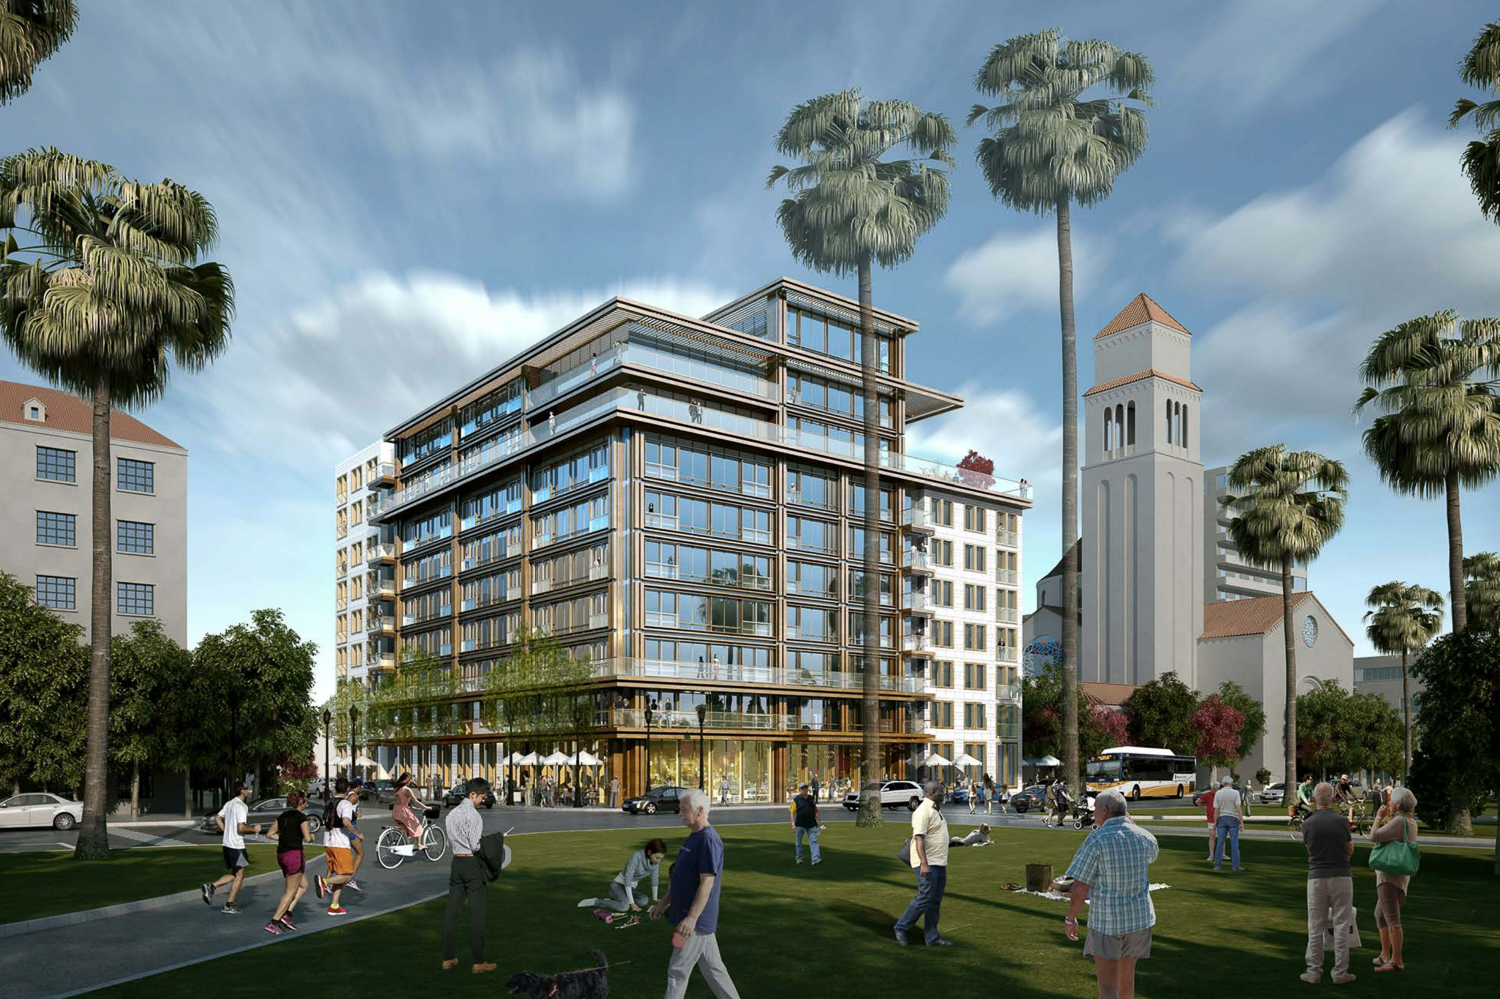 Outdated rendering of 1330 N Street, design by HKS Architects